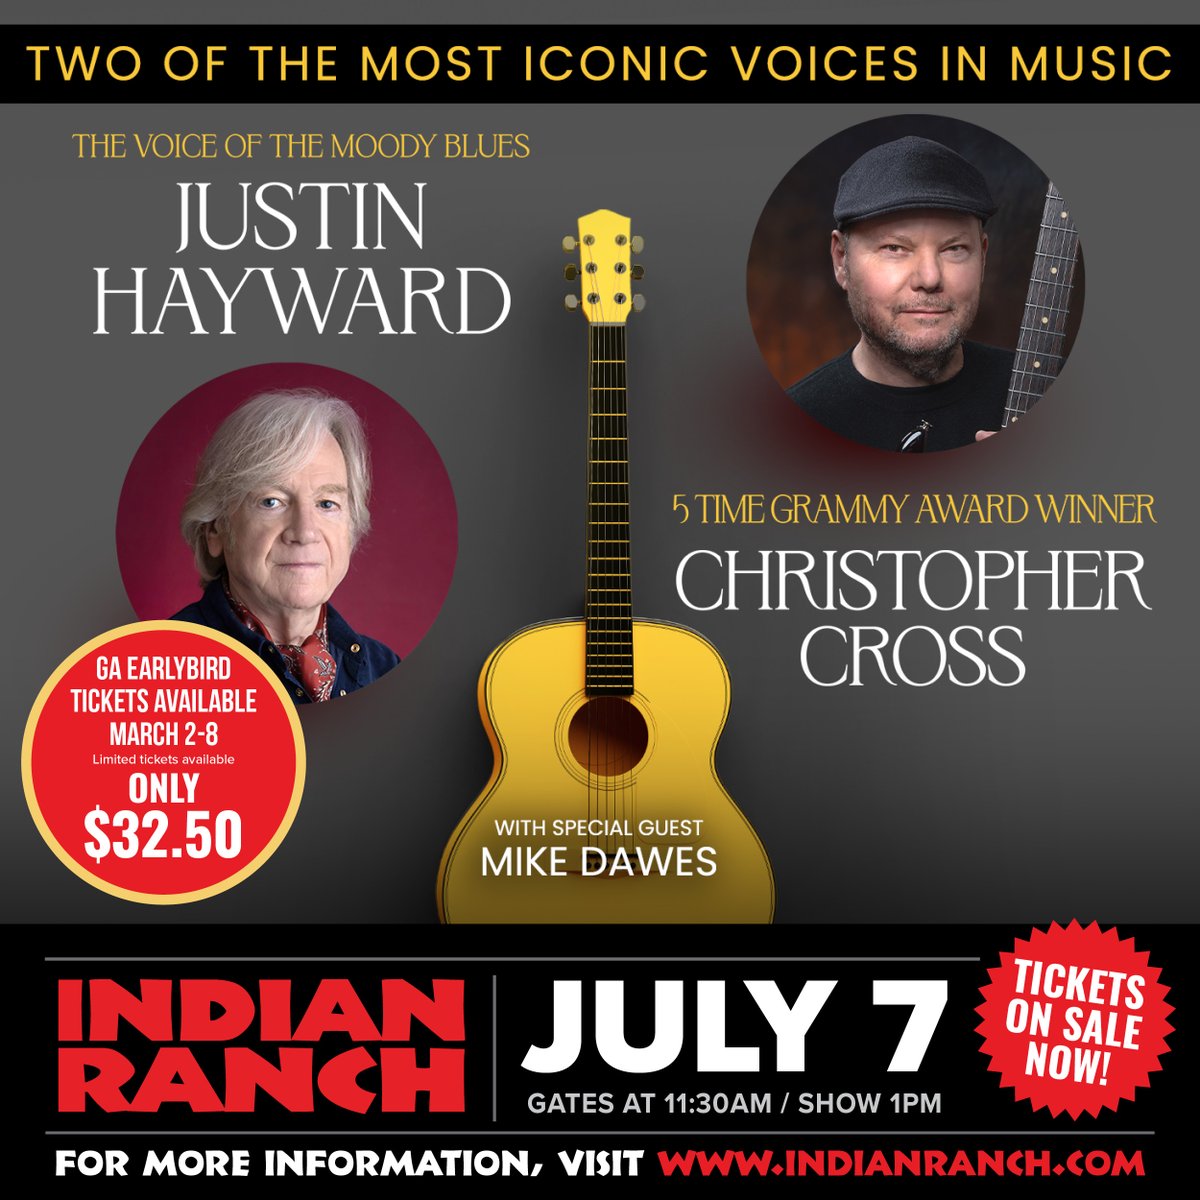 Last call for Low Dough Early Bird GA tickets to Justin Hayward and Christopher Cross! Prices increase at midnight. Buy tickets now at indianranch.com🎫
·
·
#justinhayward #christophercross #livemusic #concert #show #entertainment #indianranch #websterma #MyLocalMA #event